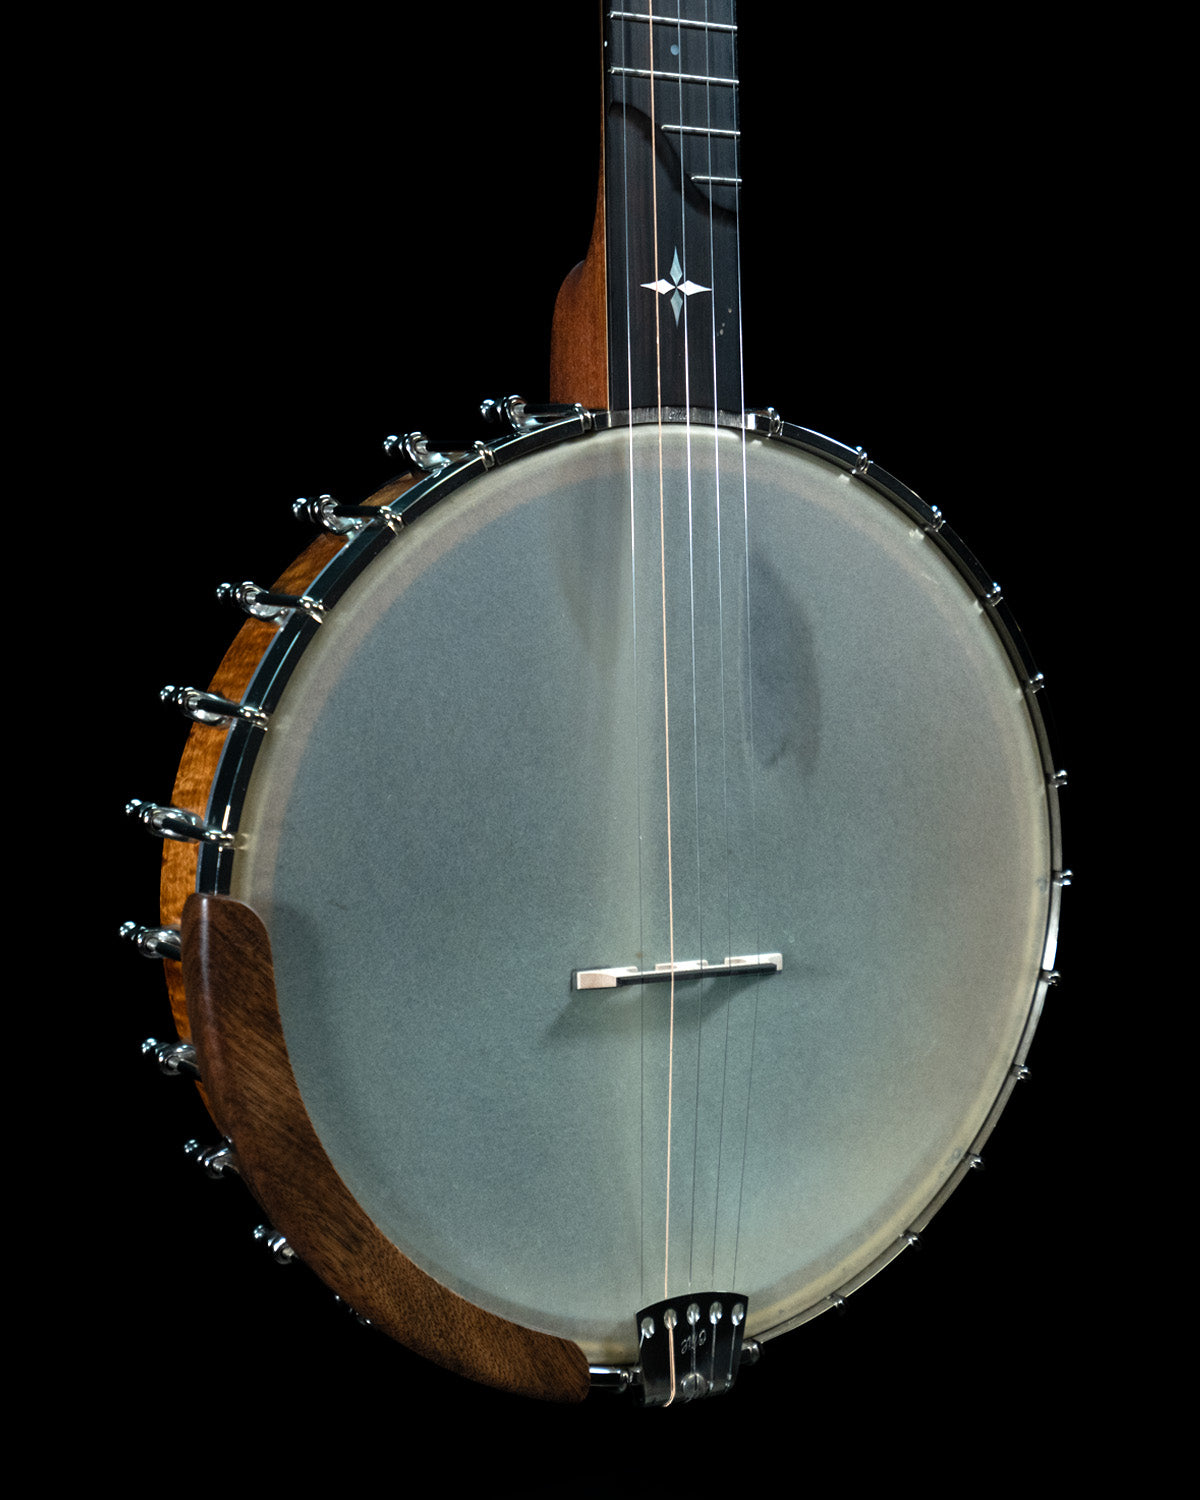 Tuning Pegs Archives - Ome Banjos